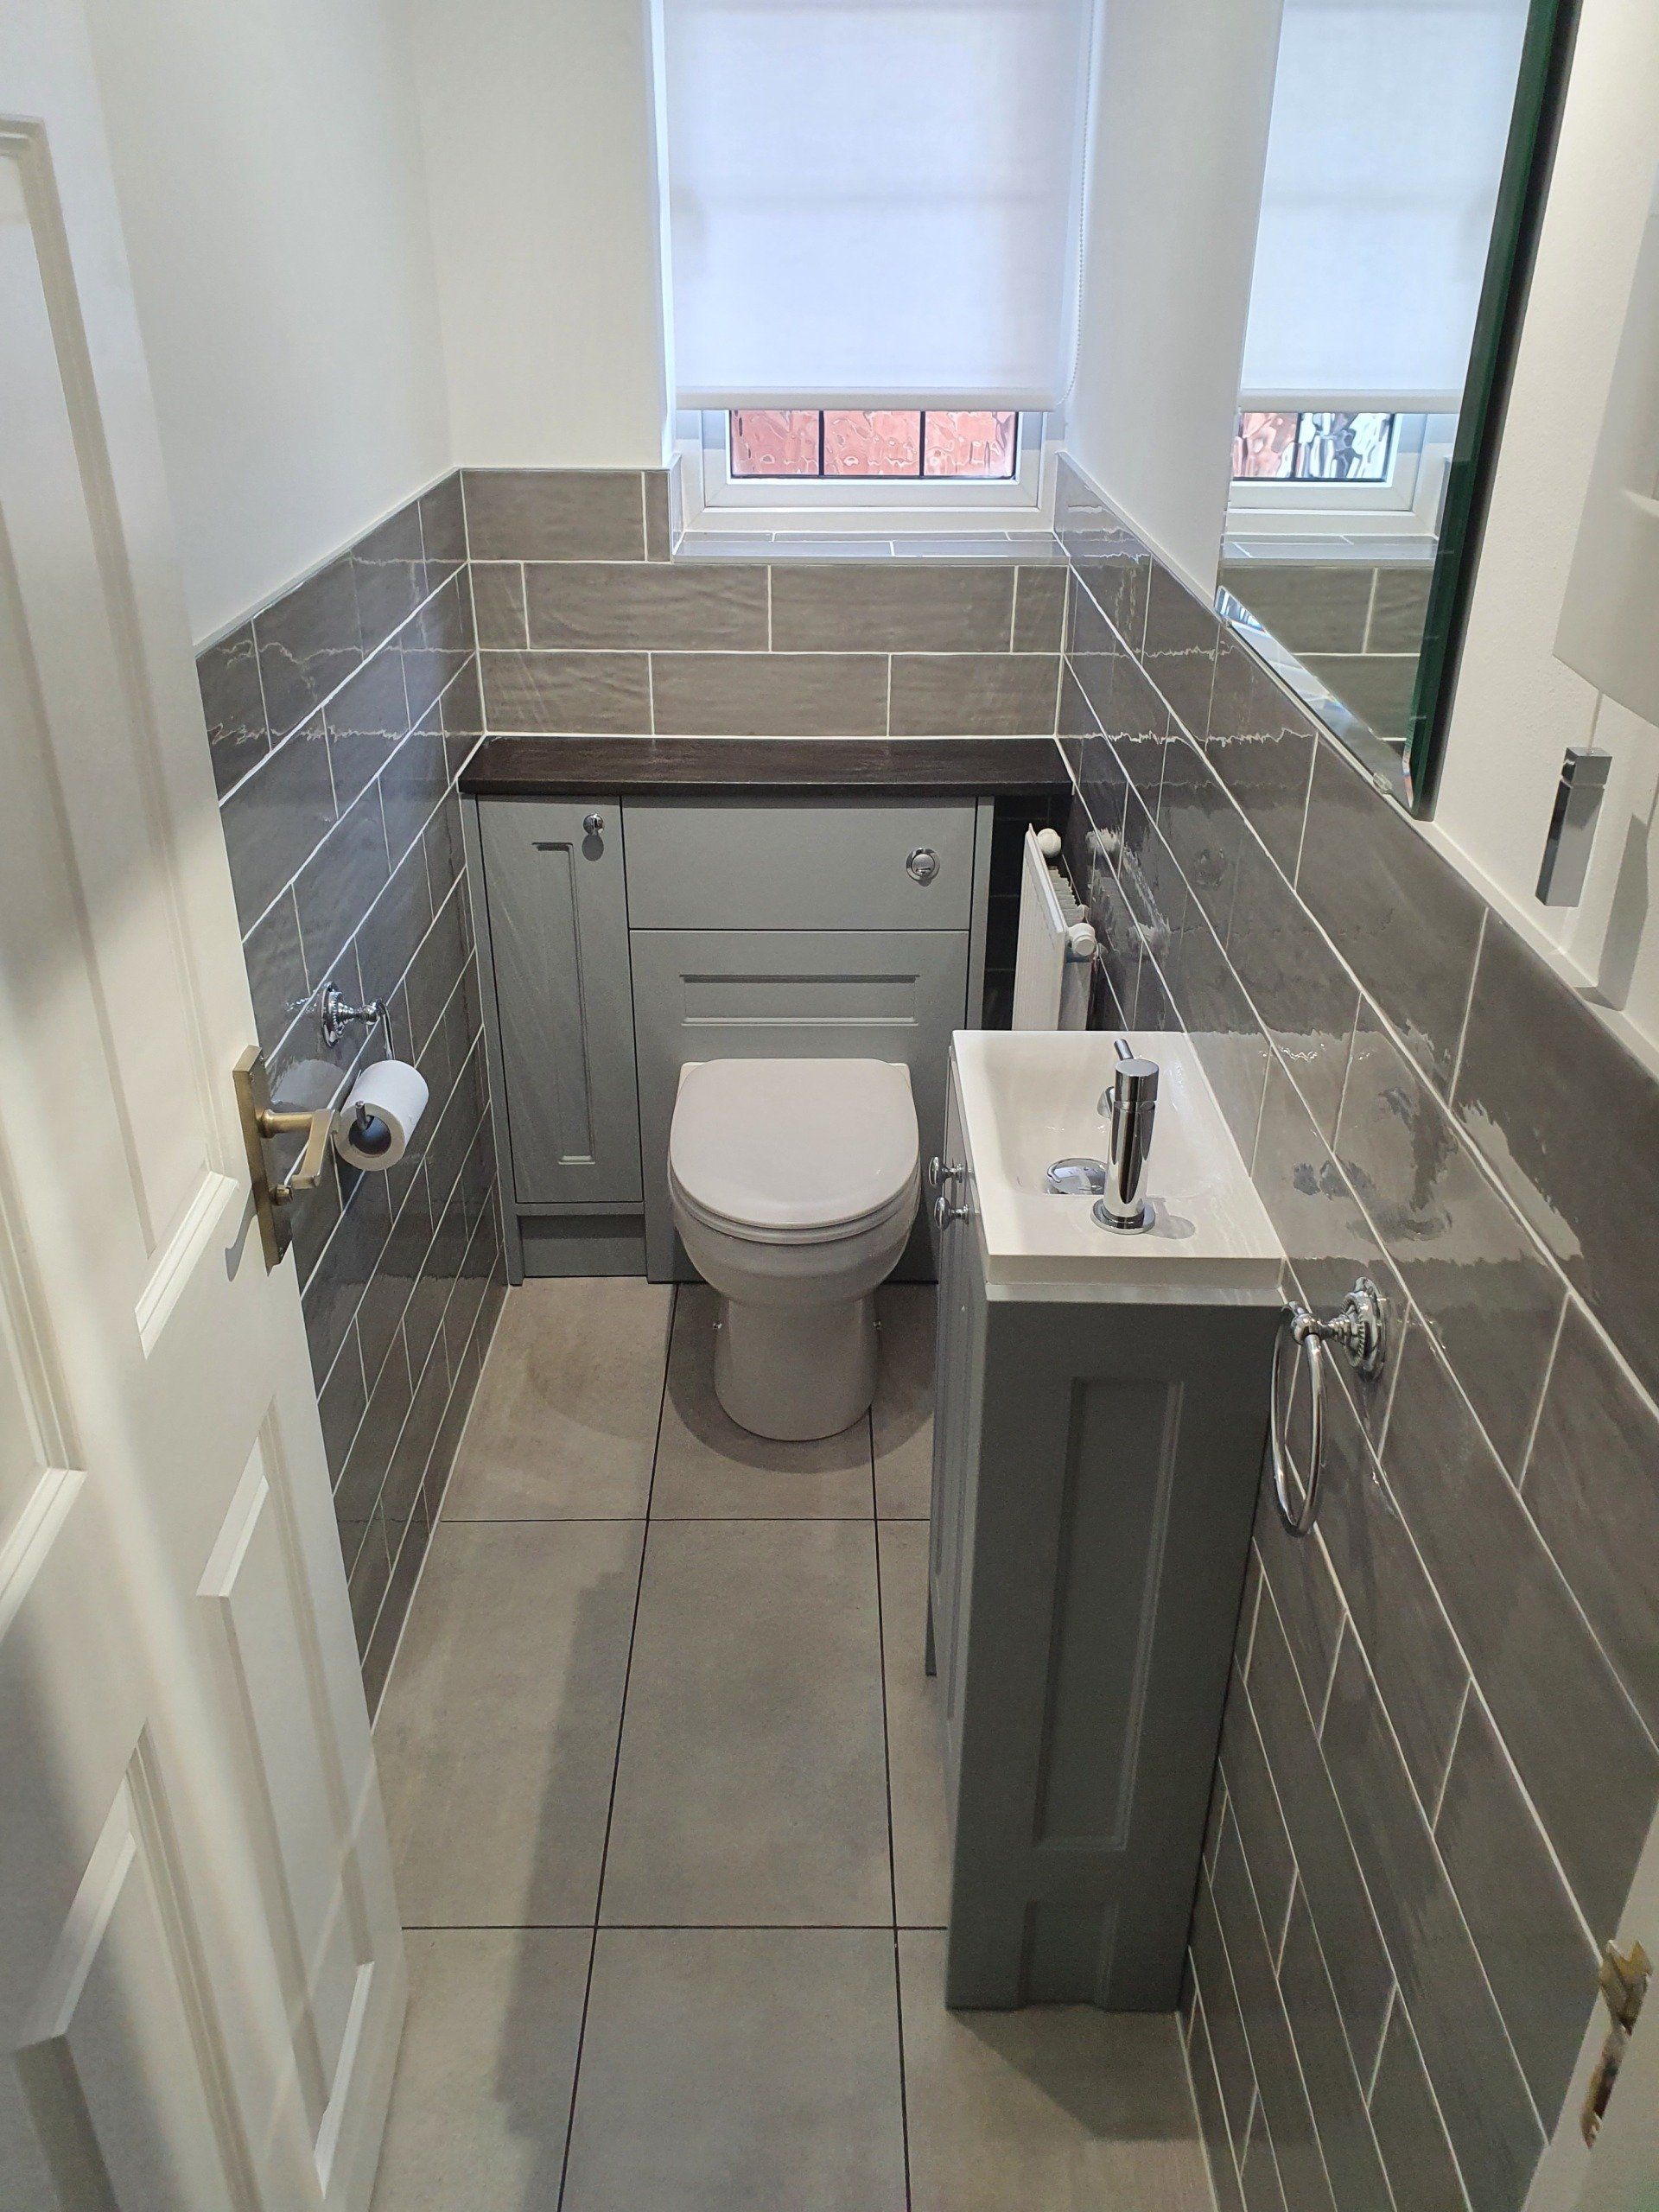 A simple outdate cloakroom refurbished into a modern grey cloakroom with added storage.  We will be returning to do the en-suite soon.